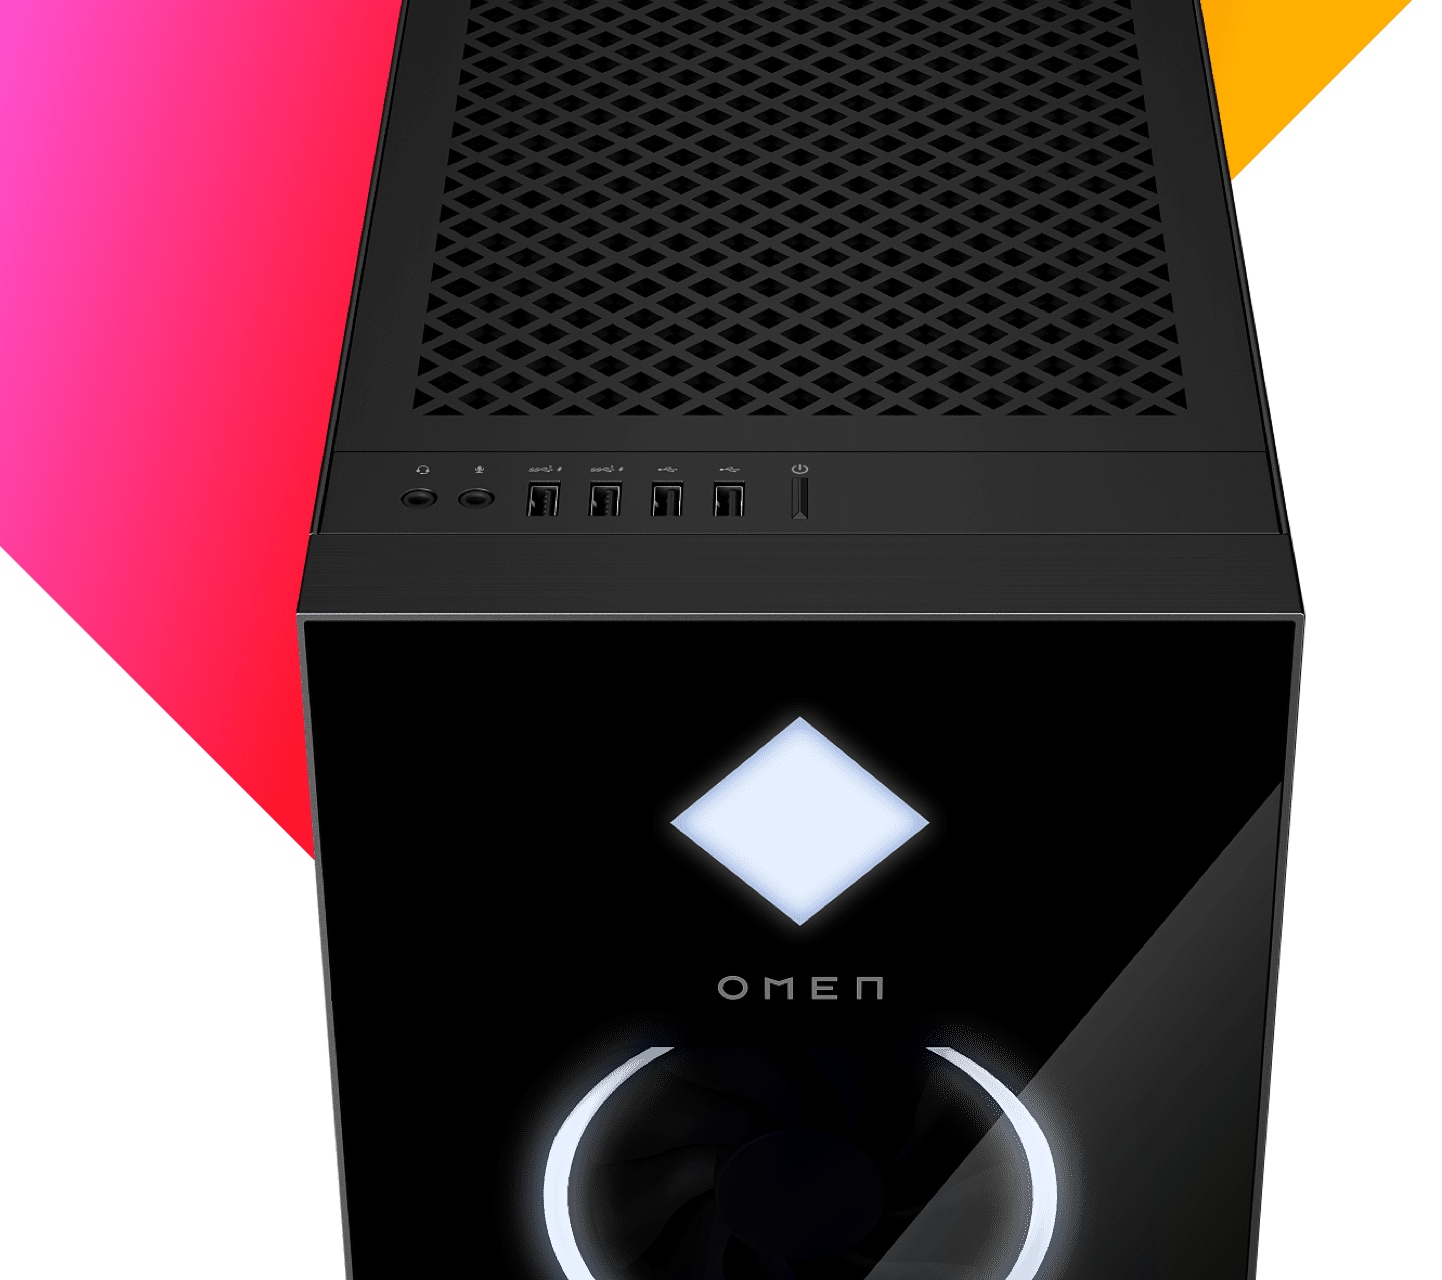 The HP 4th Of July Gaming Sale Starts Now: Save on OMEN Desktop